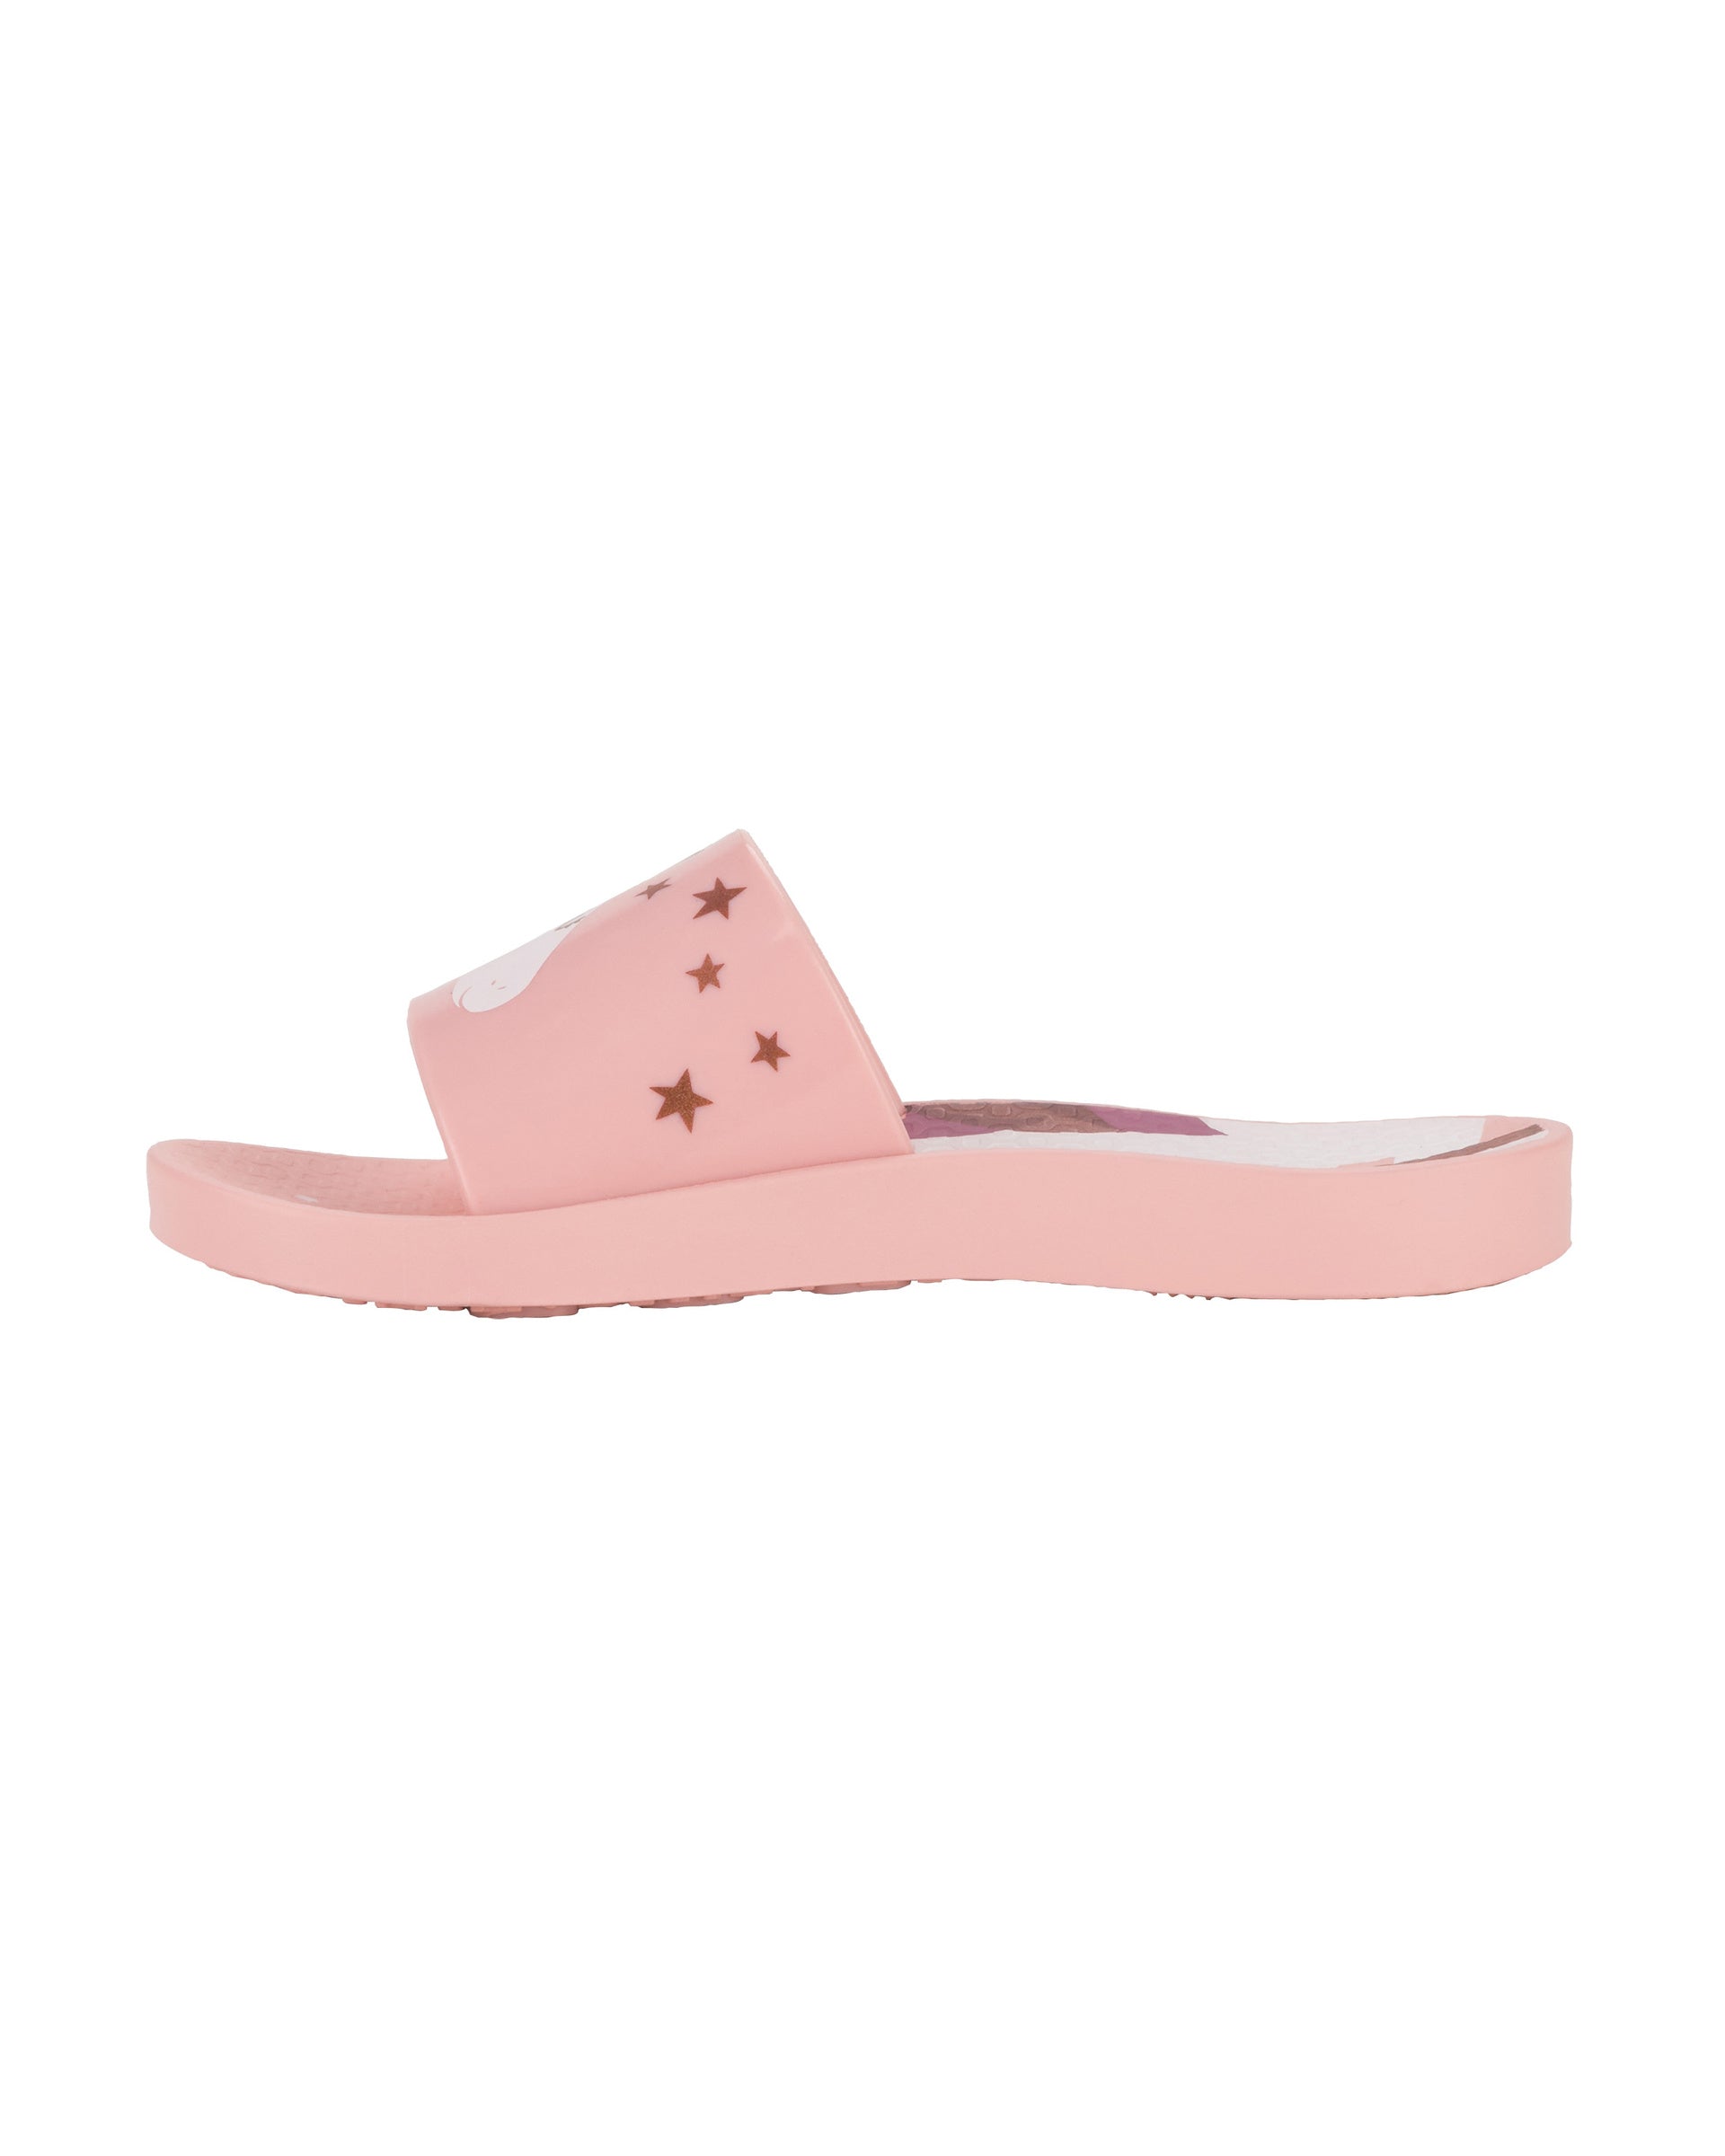 Inner side view of a pink Ipanema Urban kids slide with a unicorn on the upper.